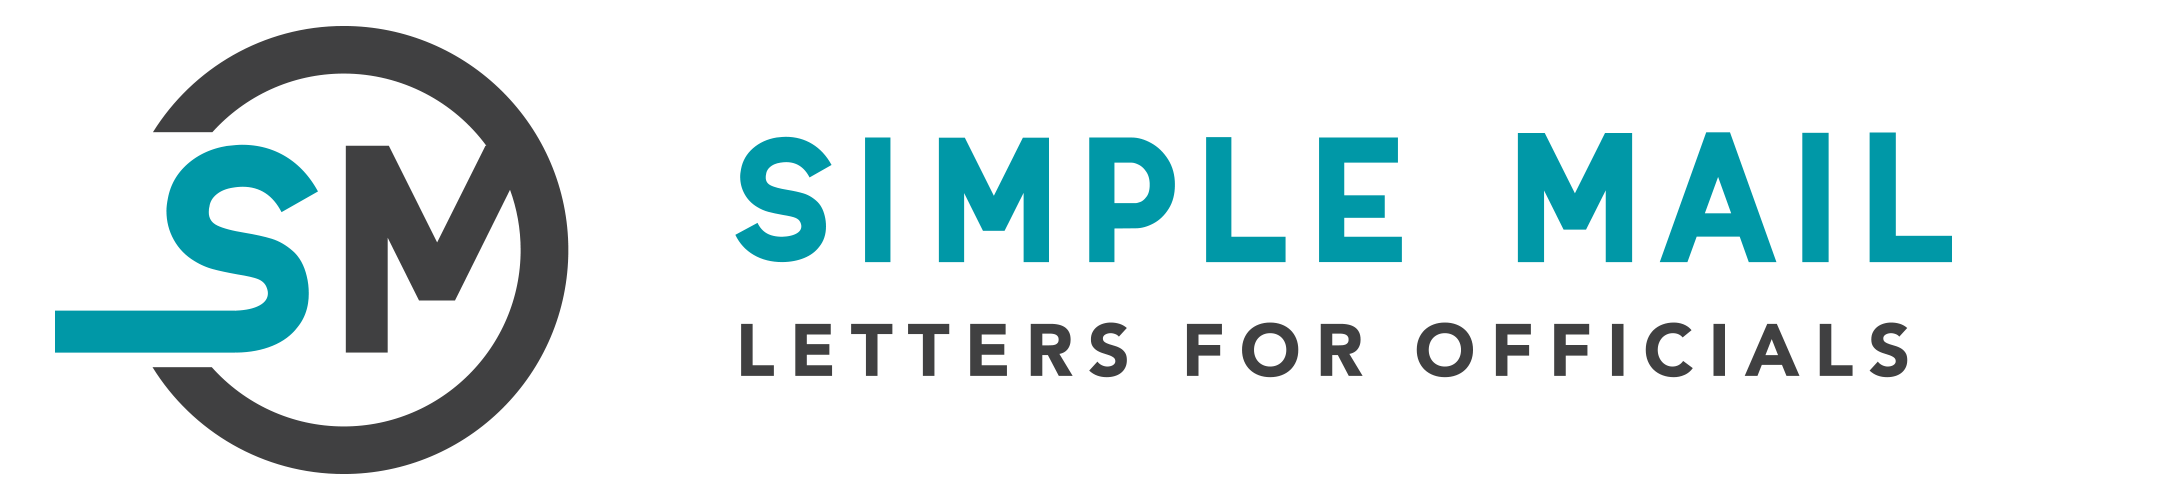 simplemail logo